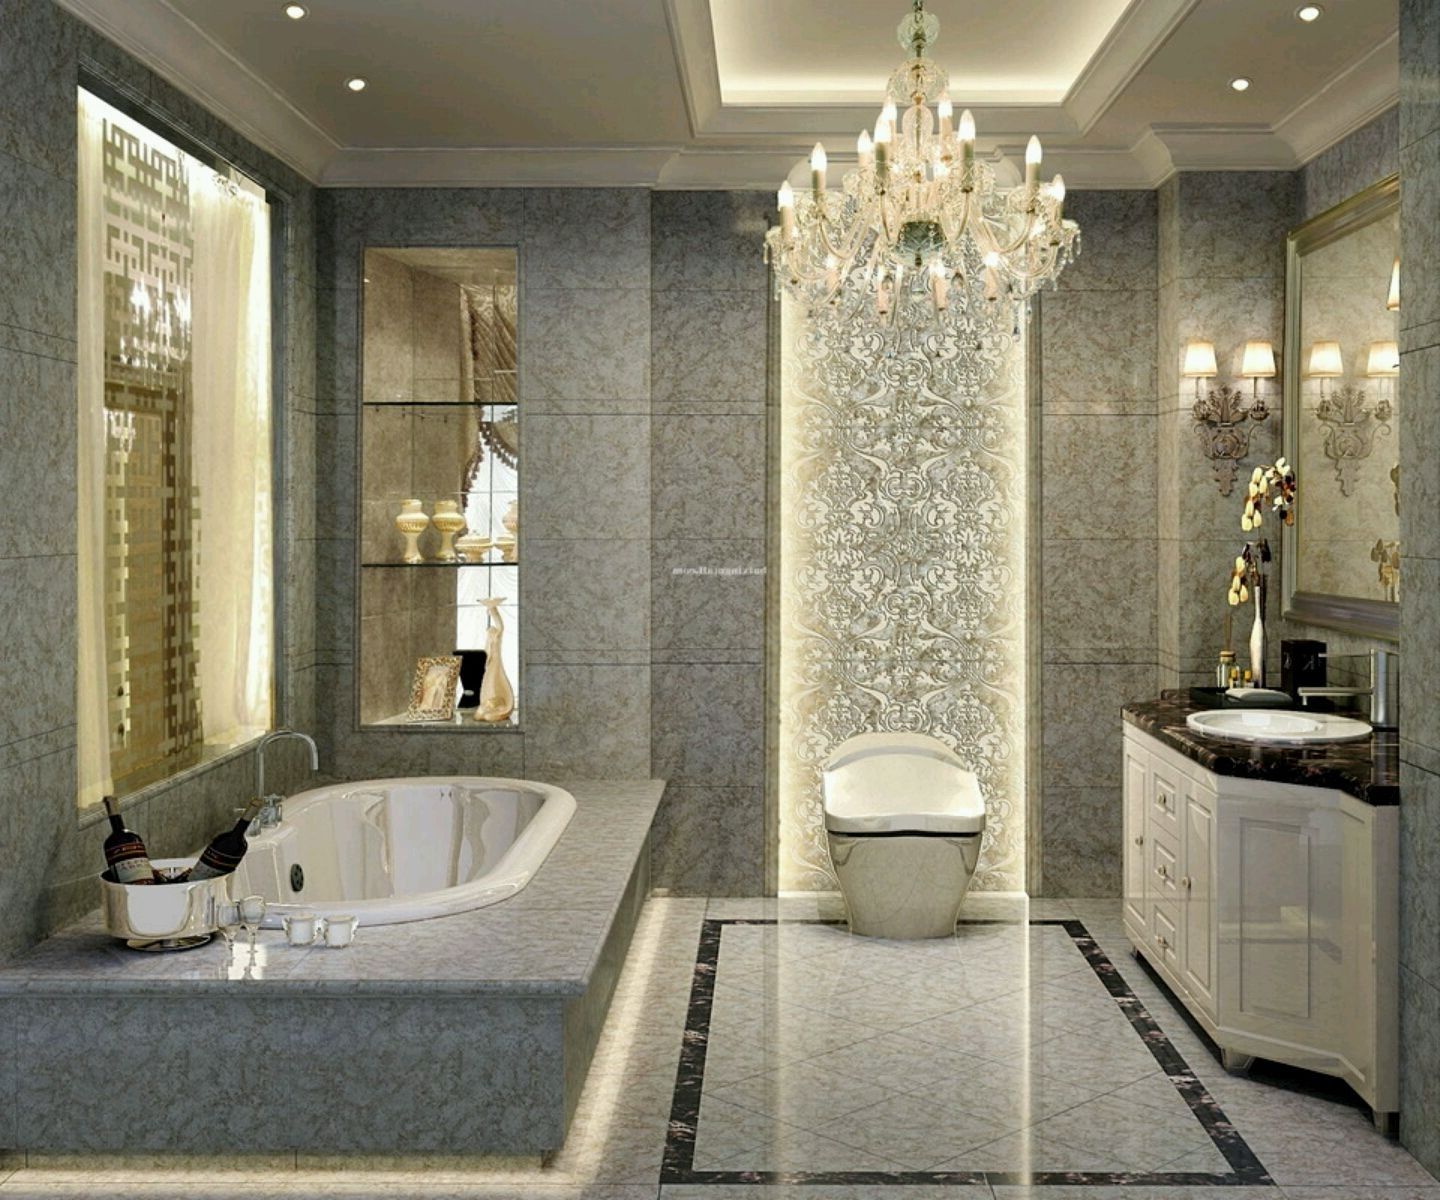 Chandelier For Bathroom Home Design Ideas Throughout Chandelier In The Bathroom (View 7 of 12)